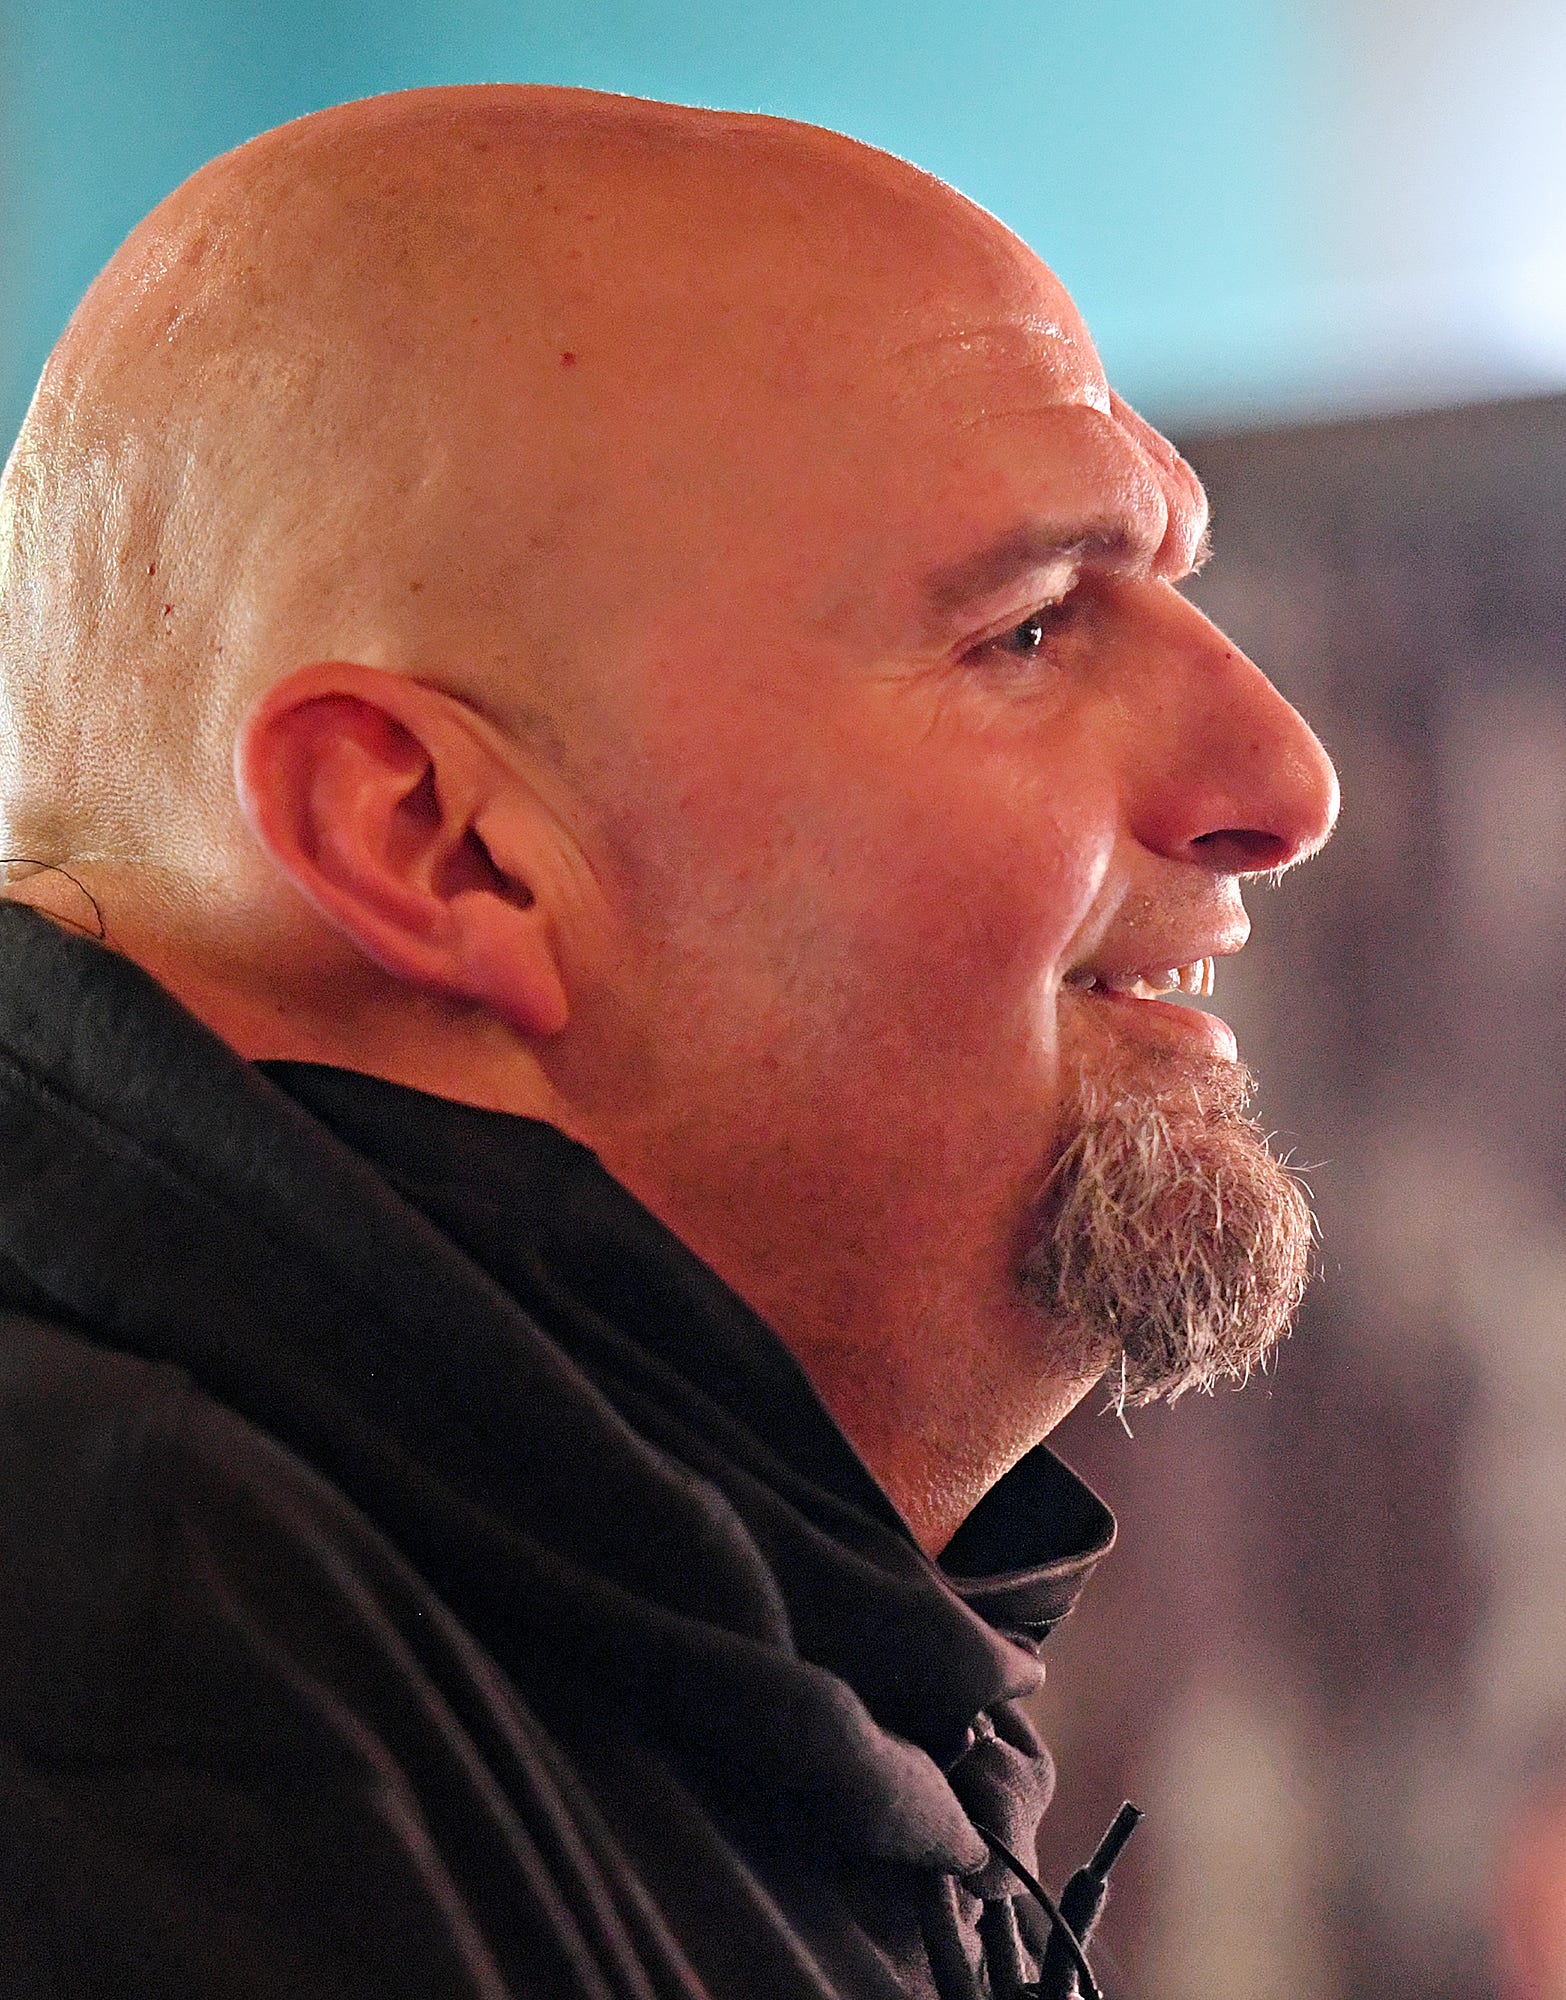 Lt. Gov. John Fetterman campaigns for U.S. Senate at Holy Hound Taproom in York City, Thursday, May 12, 2022. Dawn J. Sagert photo